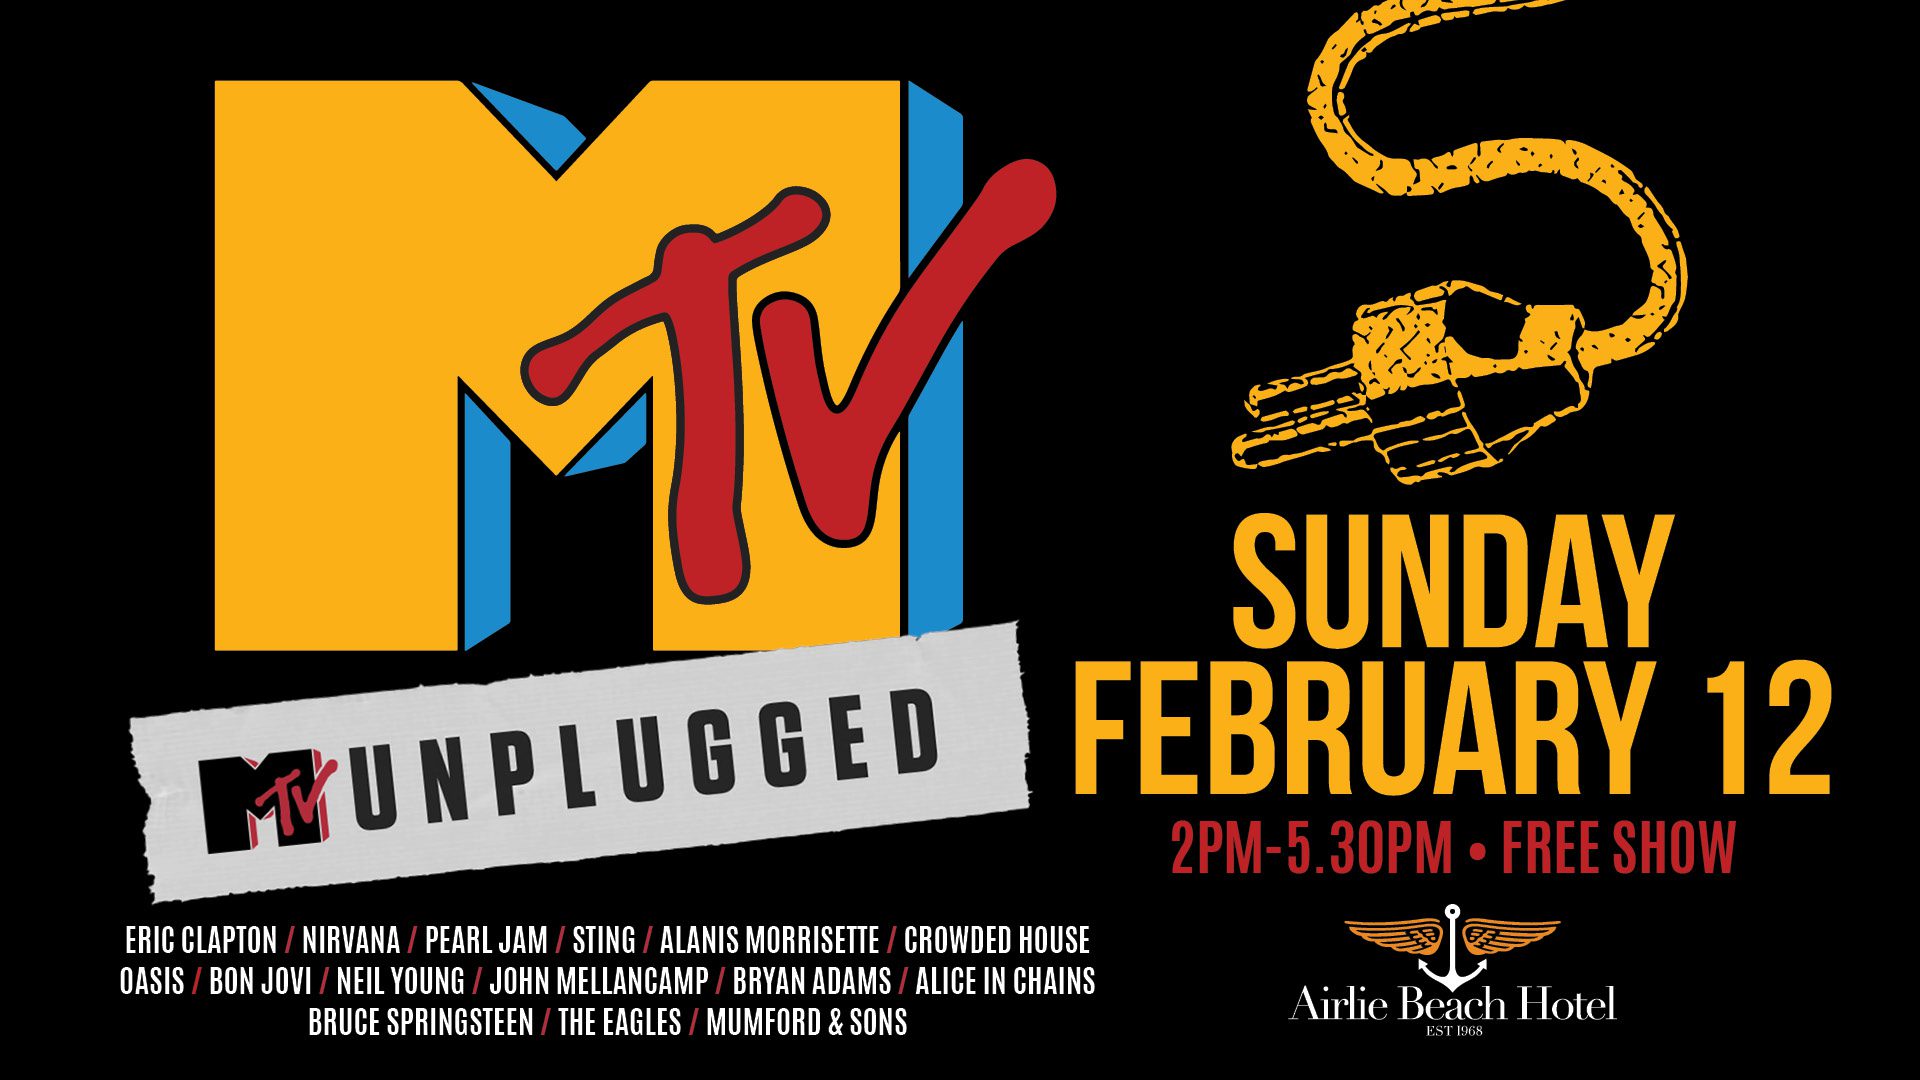 Event Poster for MTV Unplugged | Airlie Beach Hotel | EventsontheHorizon.com